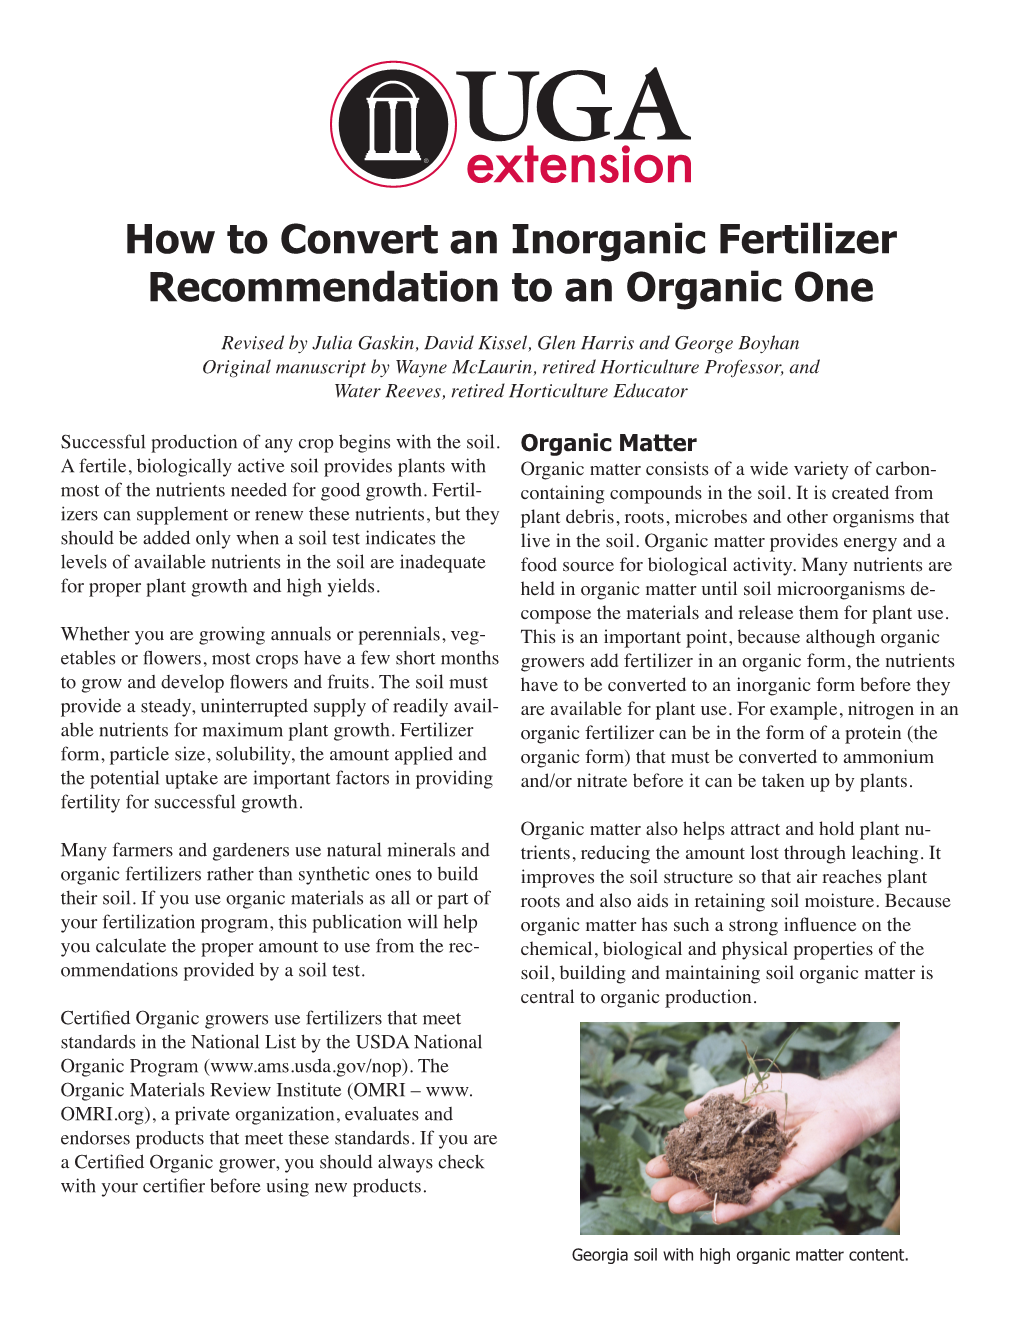 How to Convert an Inorganic Fertilizer Recommendation to an Organic One